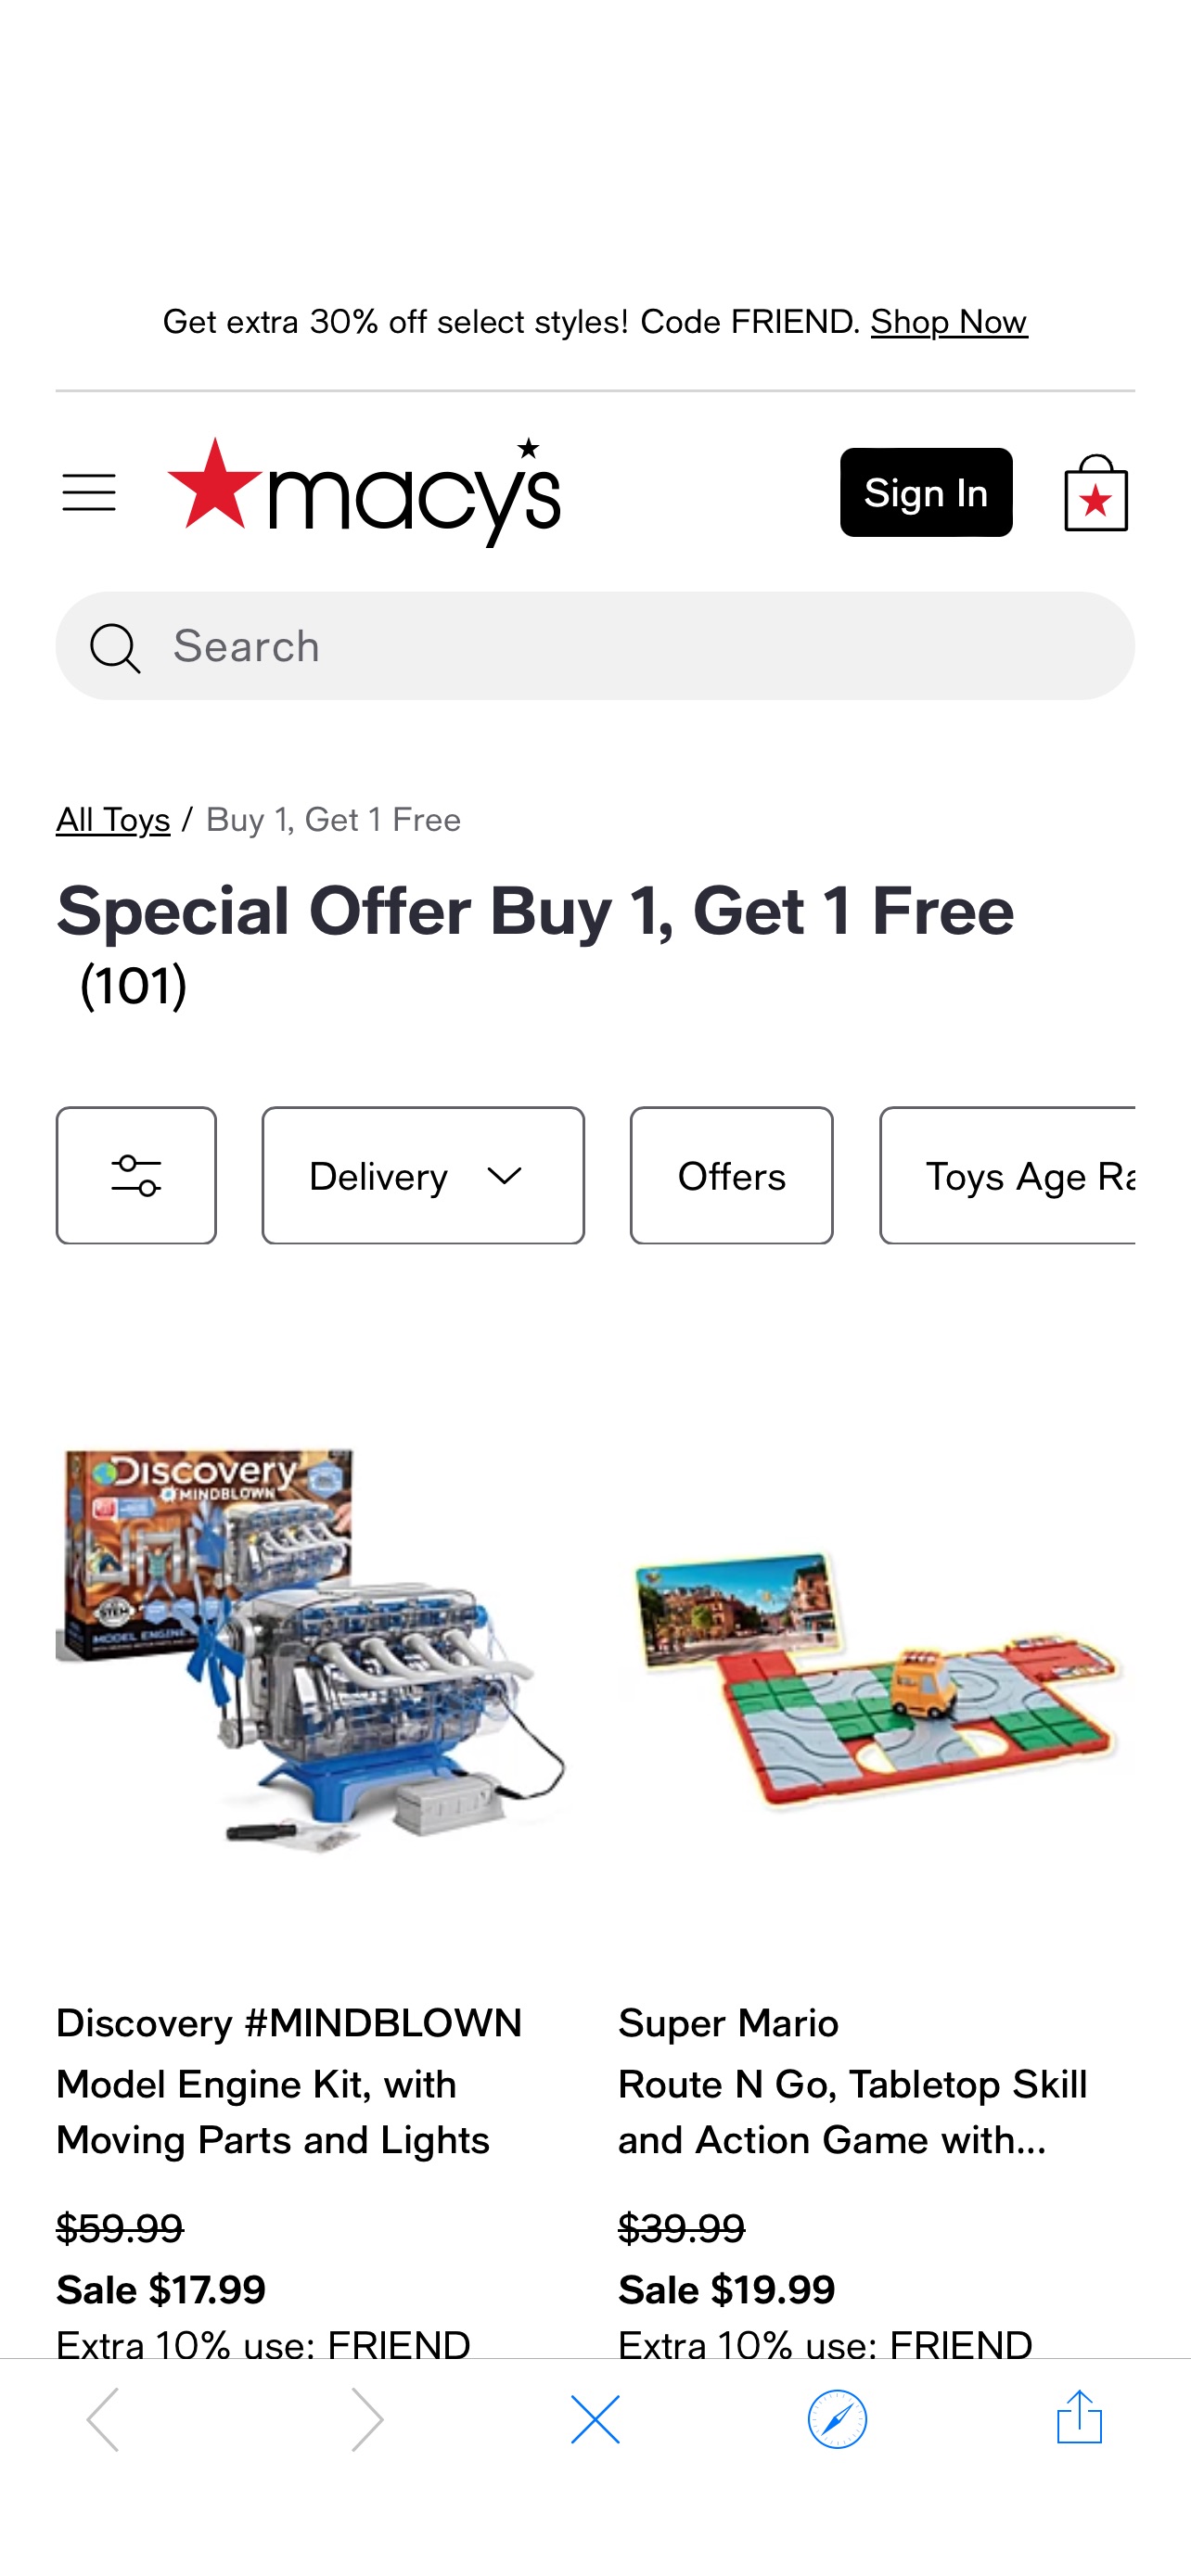 Special Offer Buy 1, Get 1 Free - Macy's